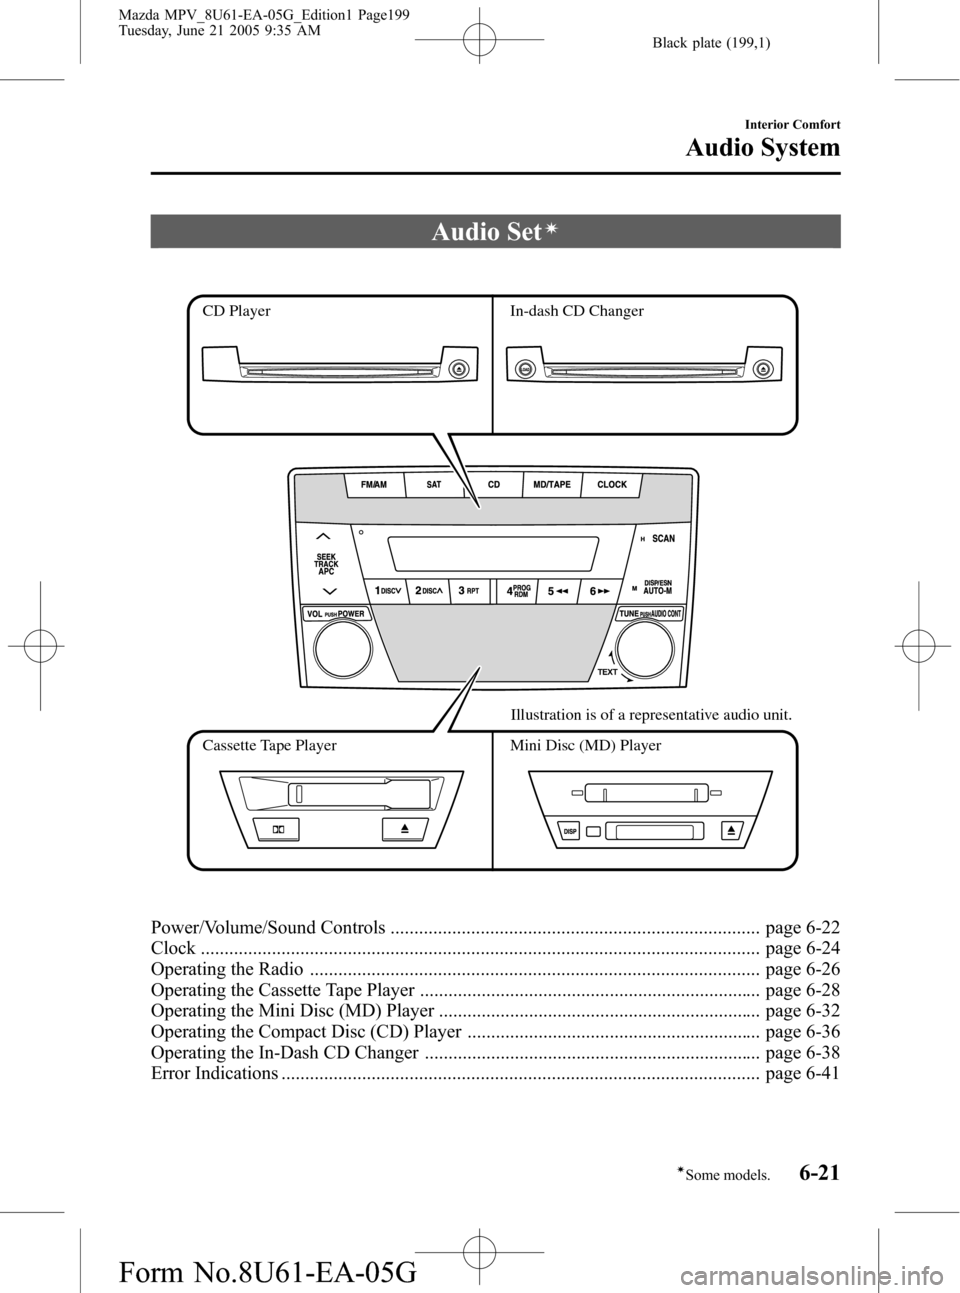 MAZDA MODEL MPV 2006  Owners Manual (in English) Black plate (199,1)
Audio Setí
CD Player In-dash CD Changer
Cassette Tape Player Mini Disc (MD) PlayerIllustration is of a representative audio unit.
Power/Volume/Sound Controls .....................